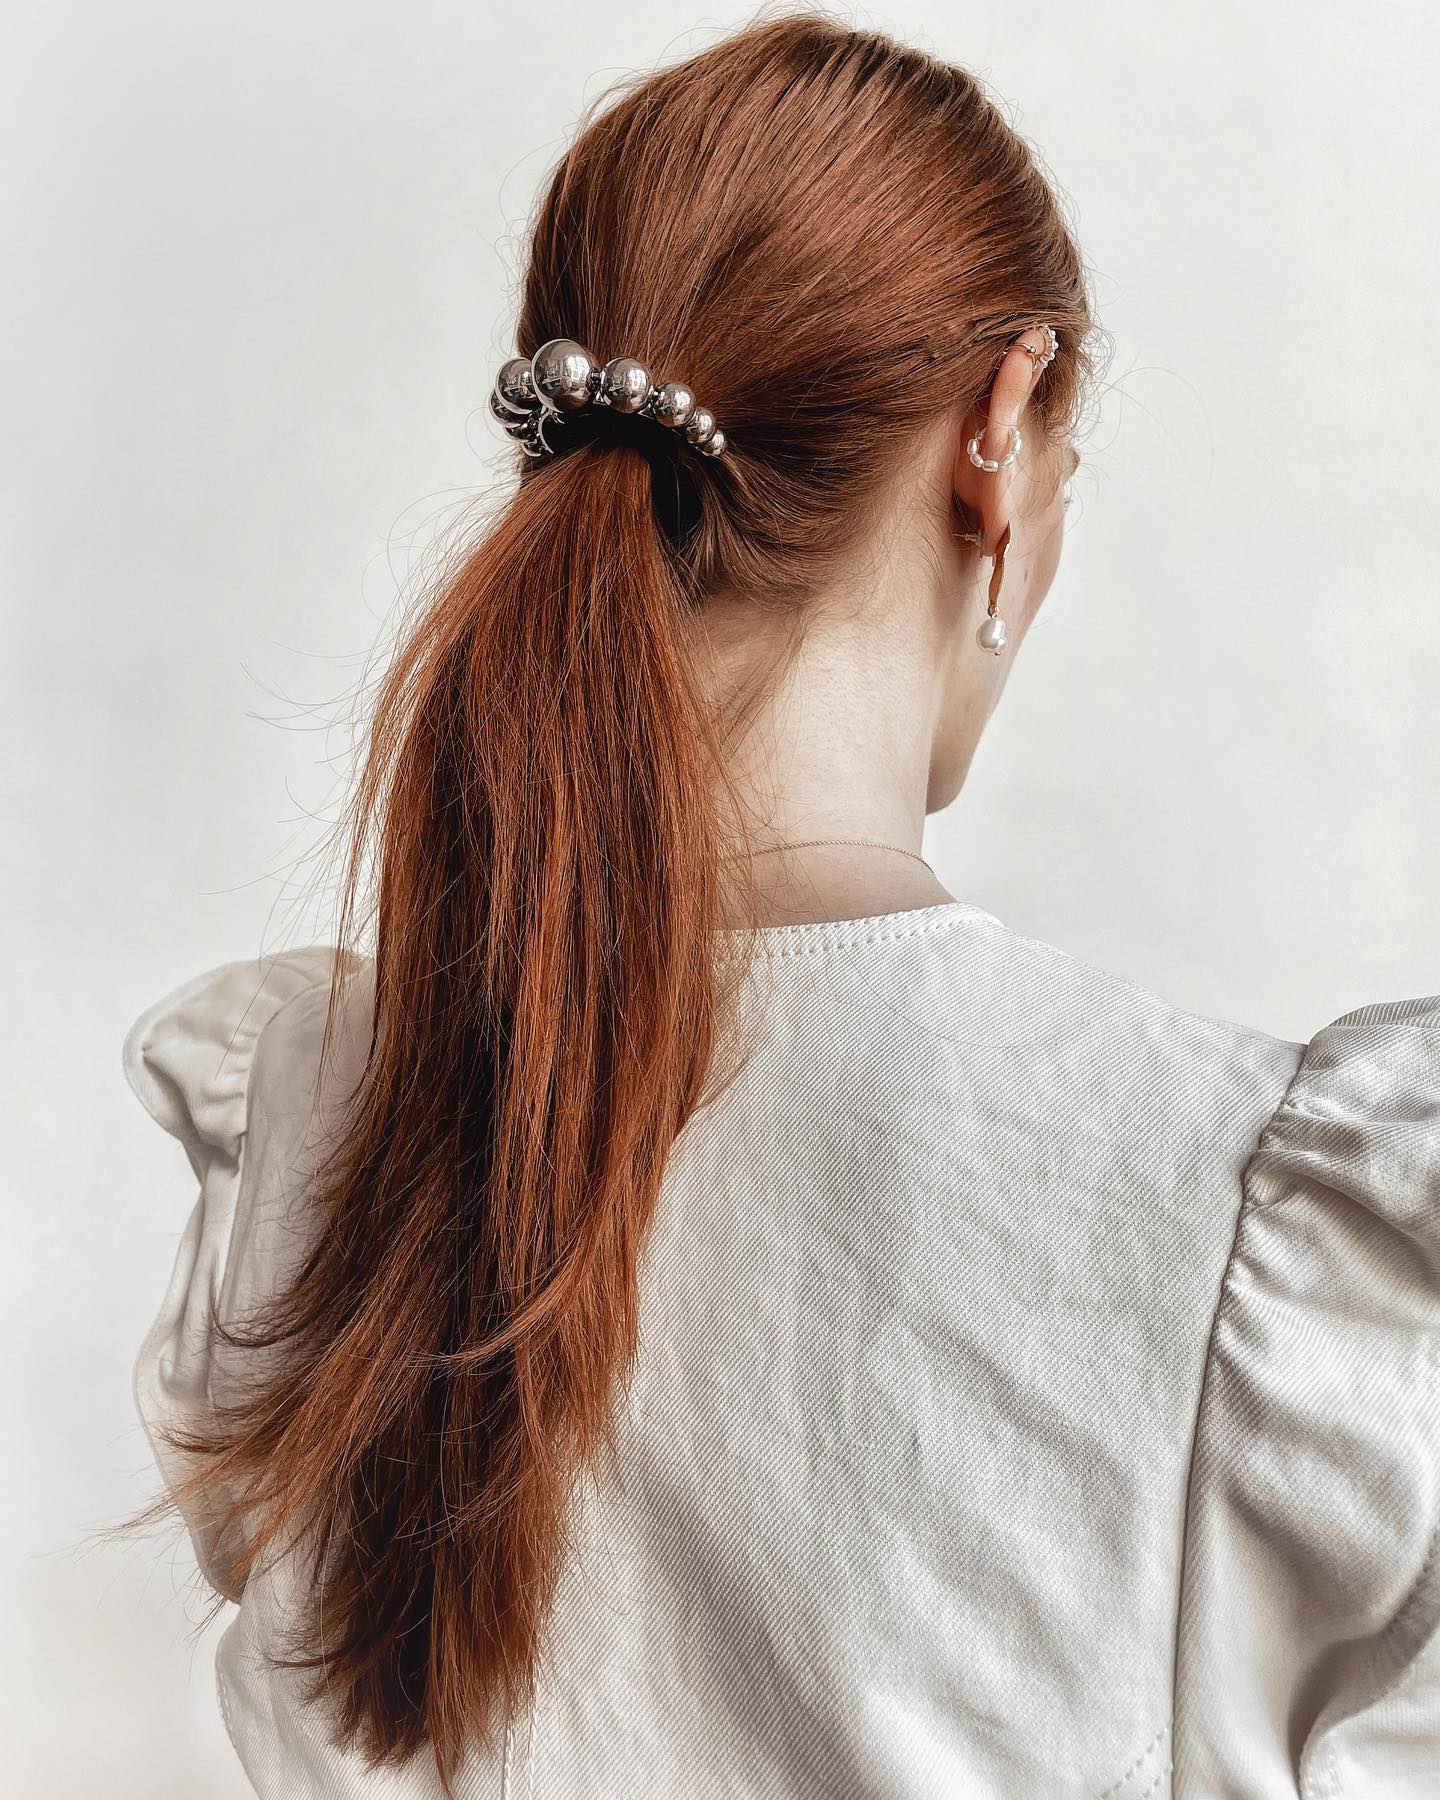 ponytail with hair accessories